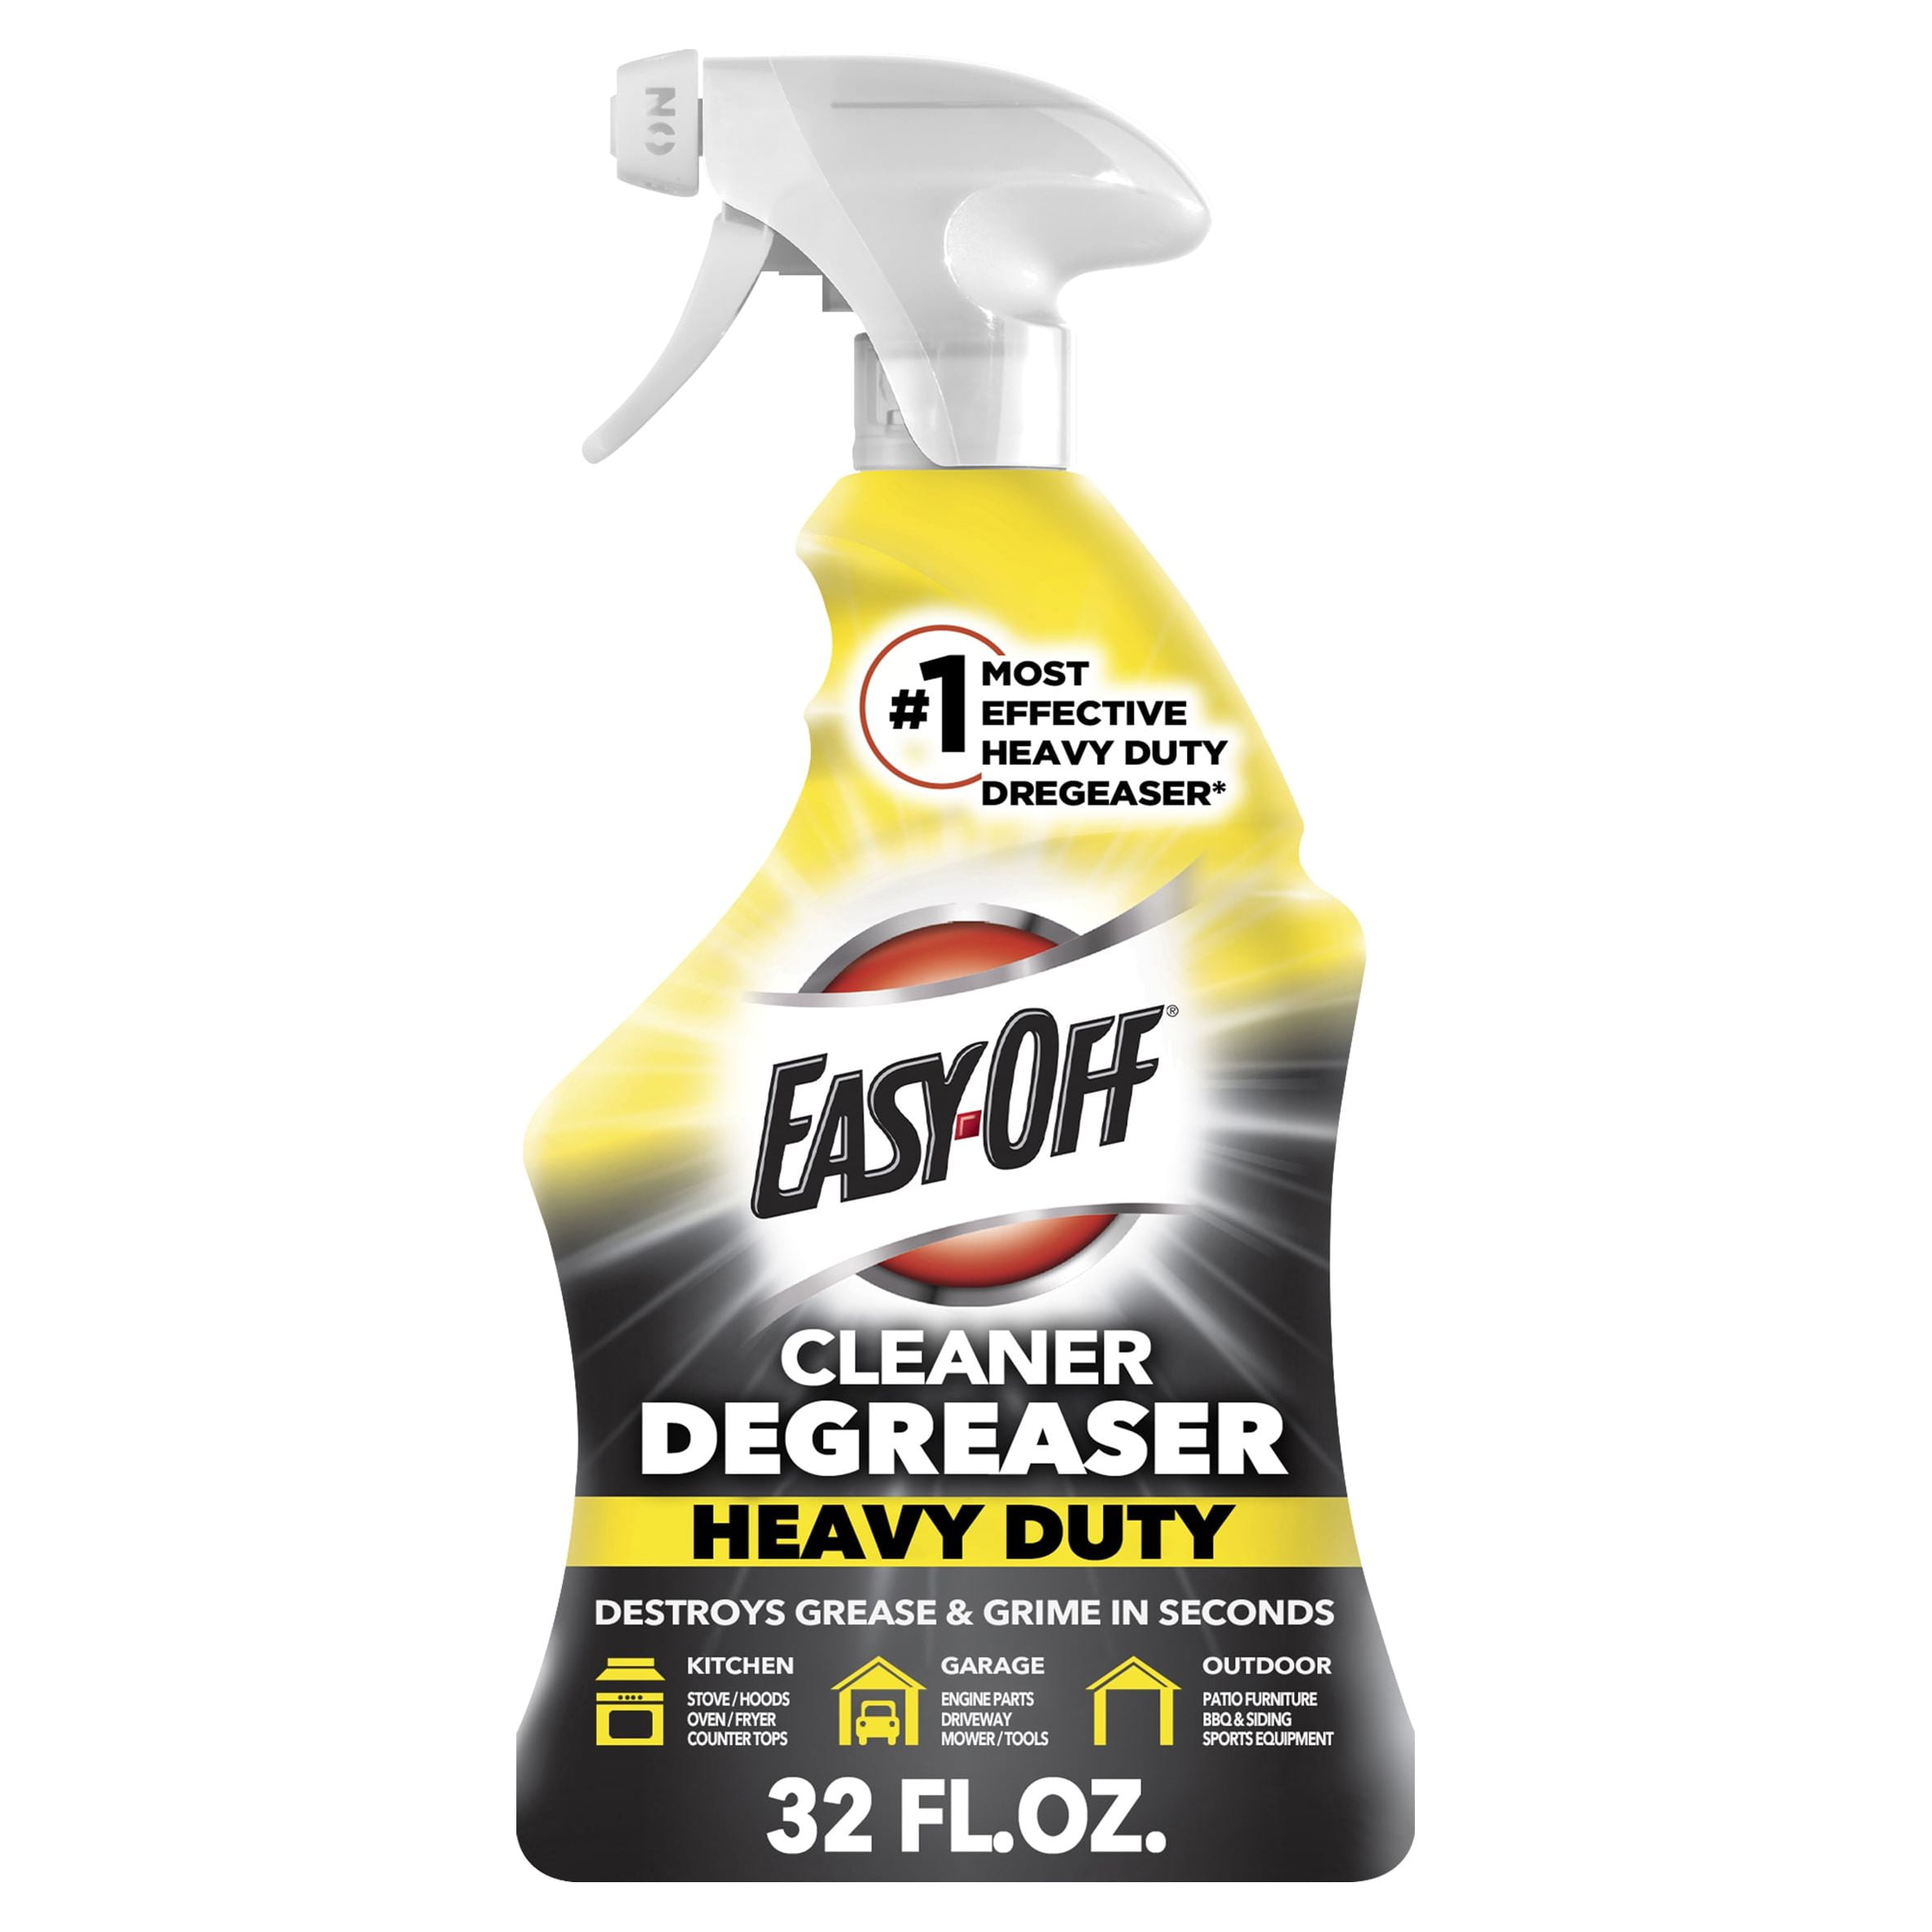 Goof Off Heavy Duty Spot Remover & Degreaser, 1 ct - Mariano's